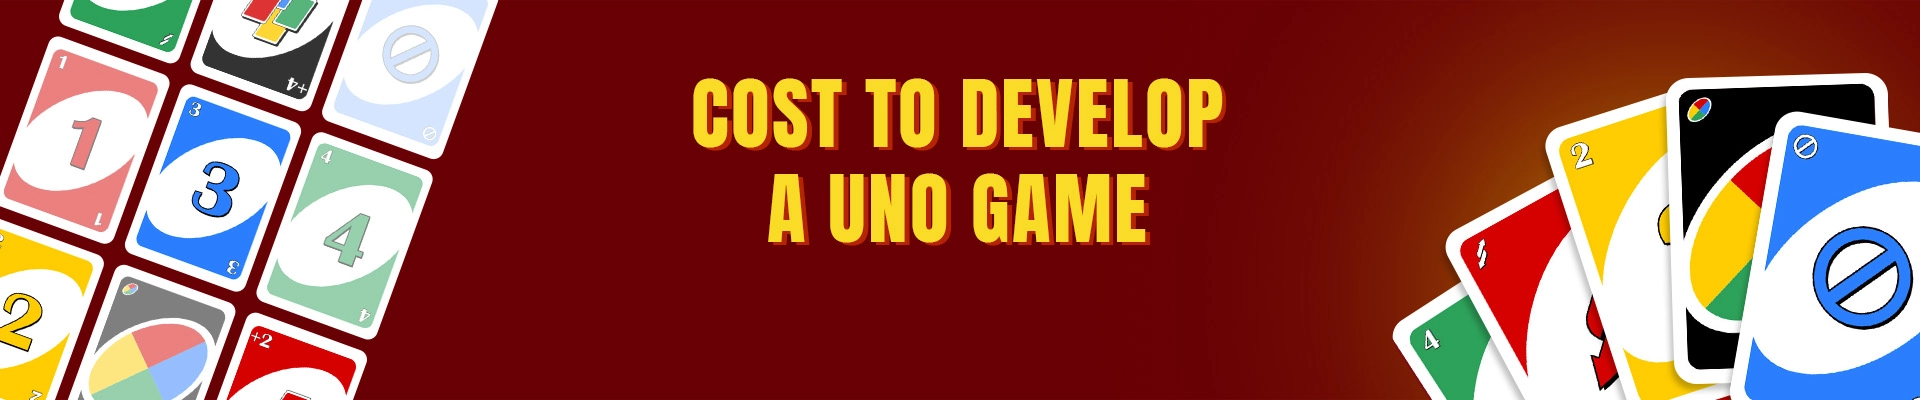 Cost to Develop a UNO Game